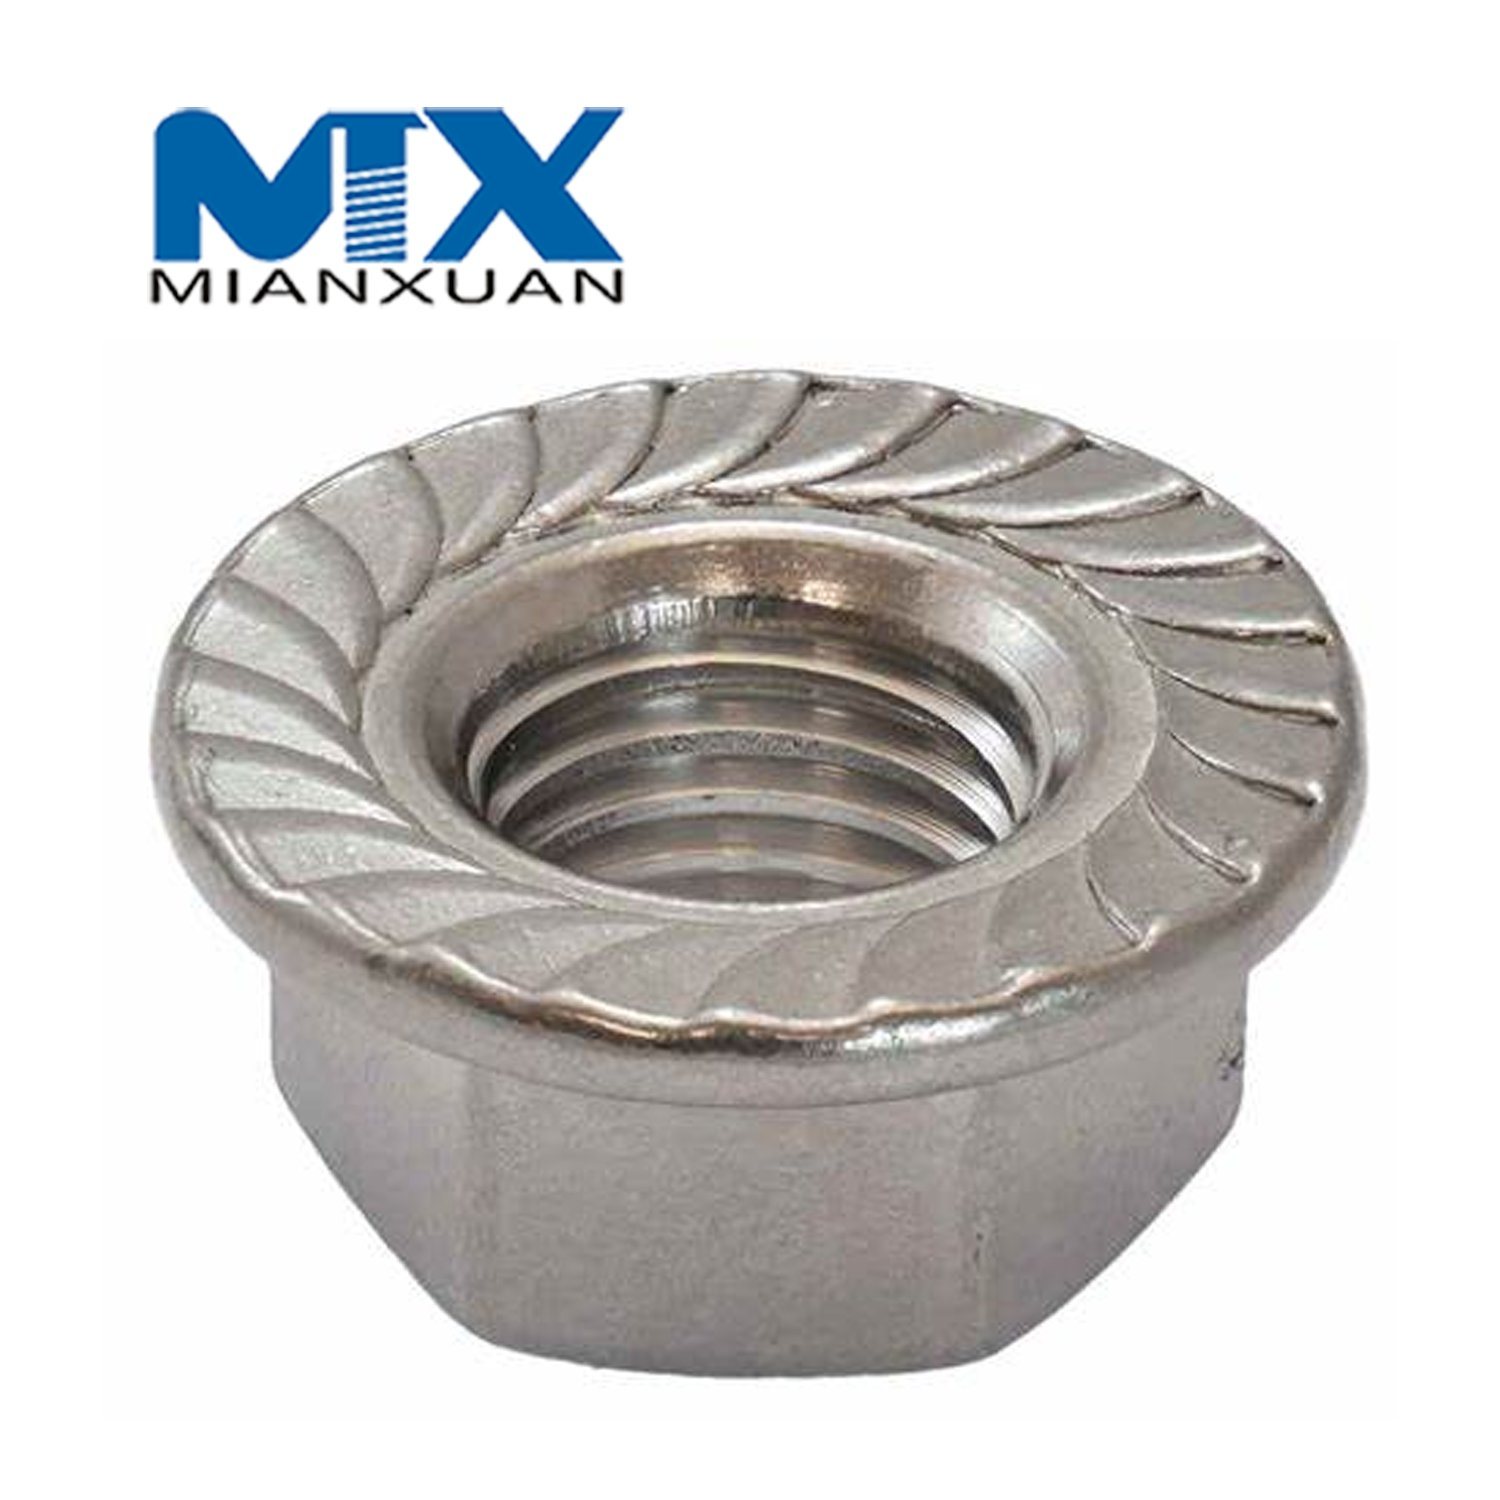 ANSI ASME Hex Nut Flange with Knurled No-Knurled